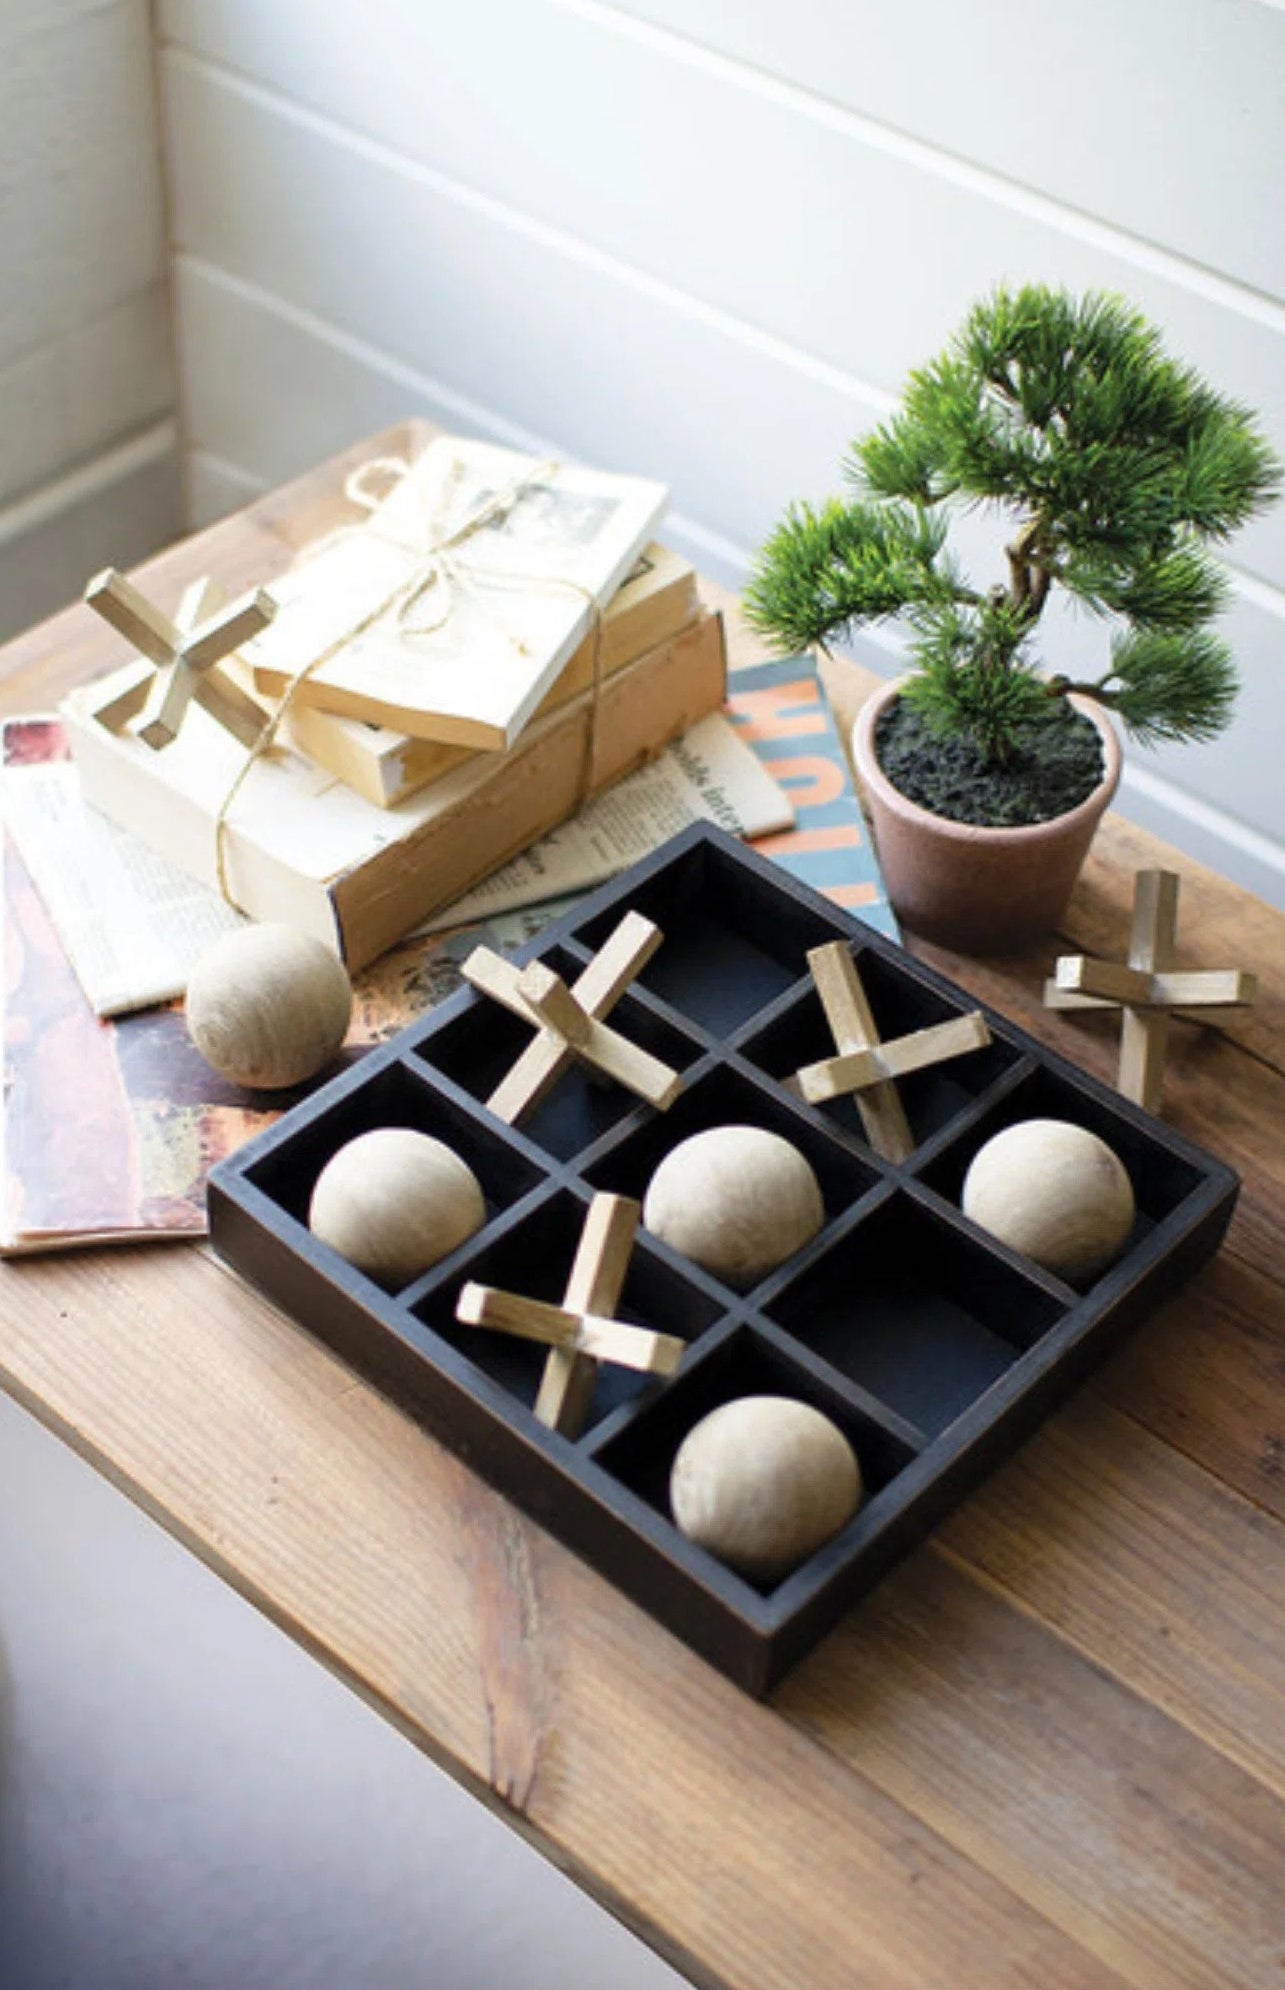 The tic-tac-toe- set on a table